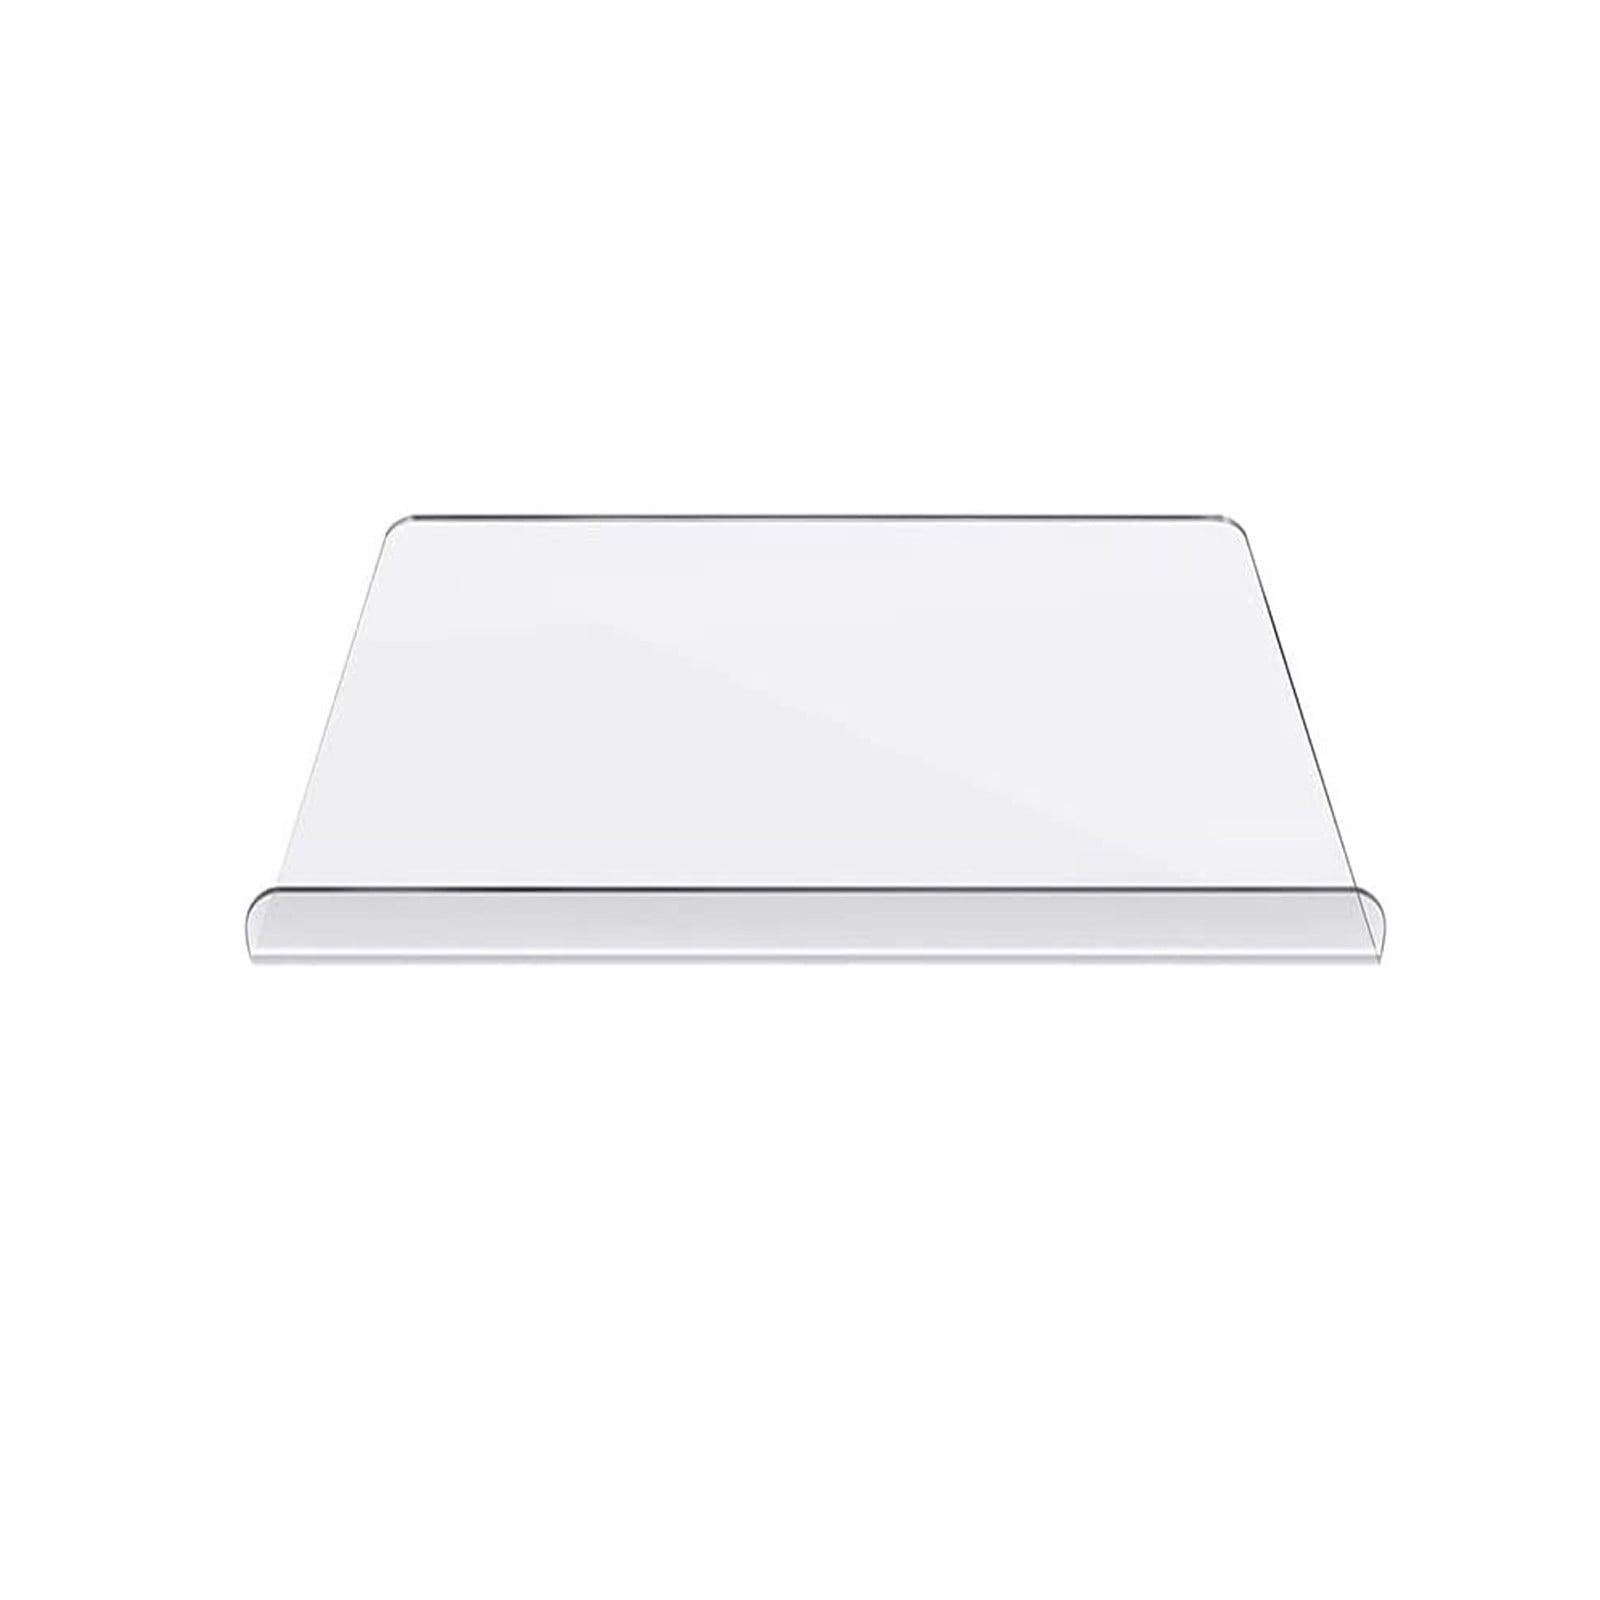 Clear Acrylic Plastic FDA cutting boards butcher blocks Cutting Boards. We  offer with 1 counter top lip and tabs are supplied for the bottom to keep  from shifting on any smooth surfaces.